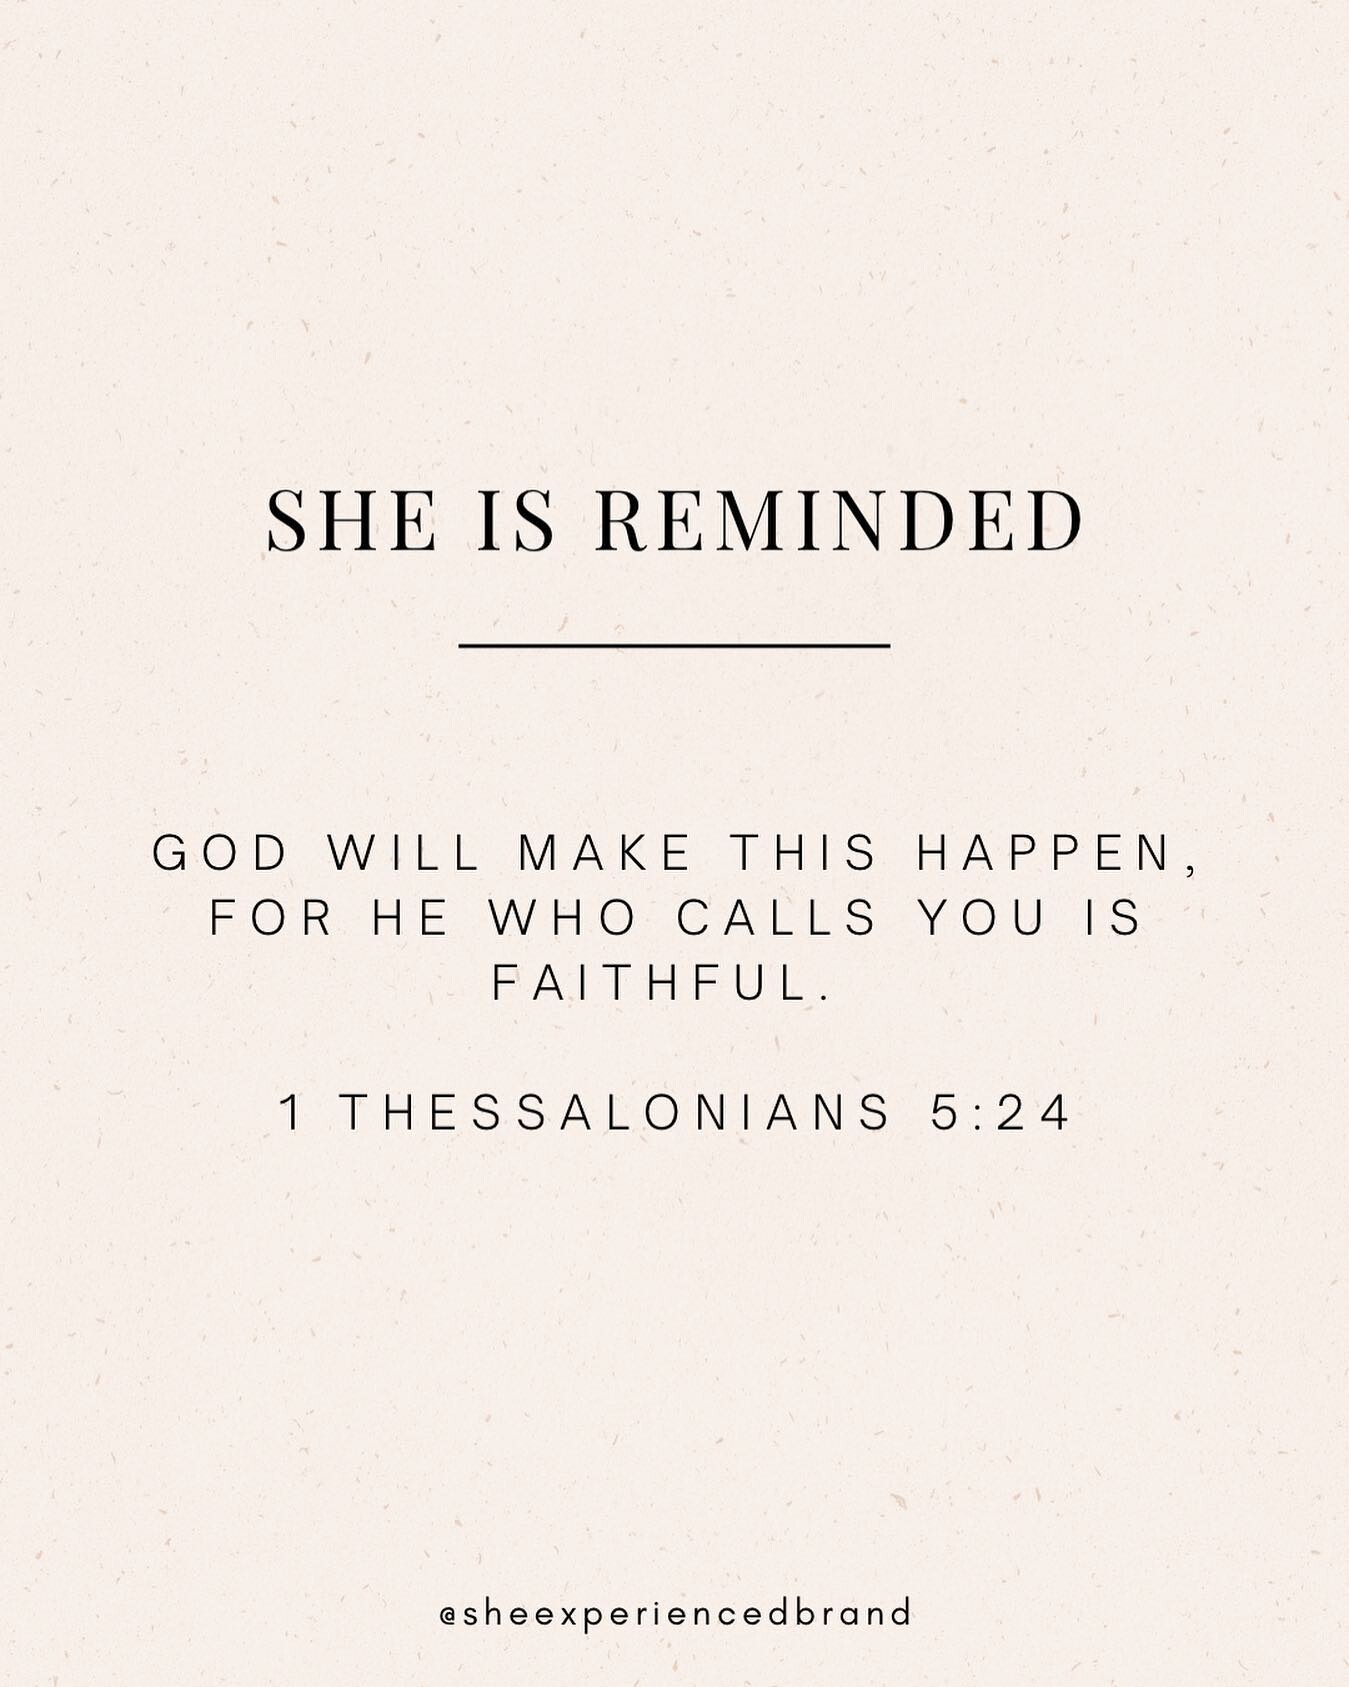 Happy Friday! 

Here’s your reminder that whatever you’ve been praying for will happen for you. The God we serve is so faithful and He will not withhold what is good for you. Be encouraged 🤍